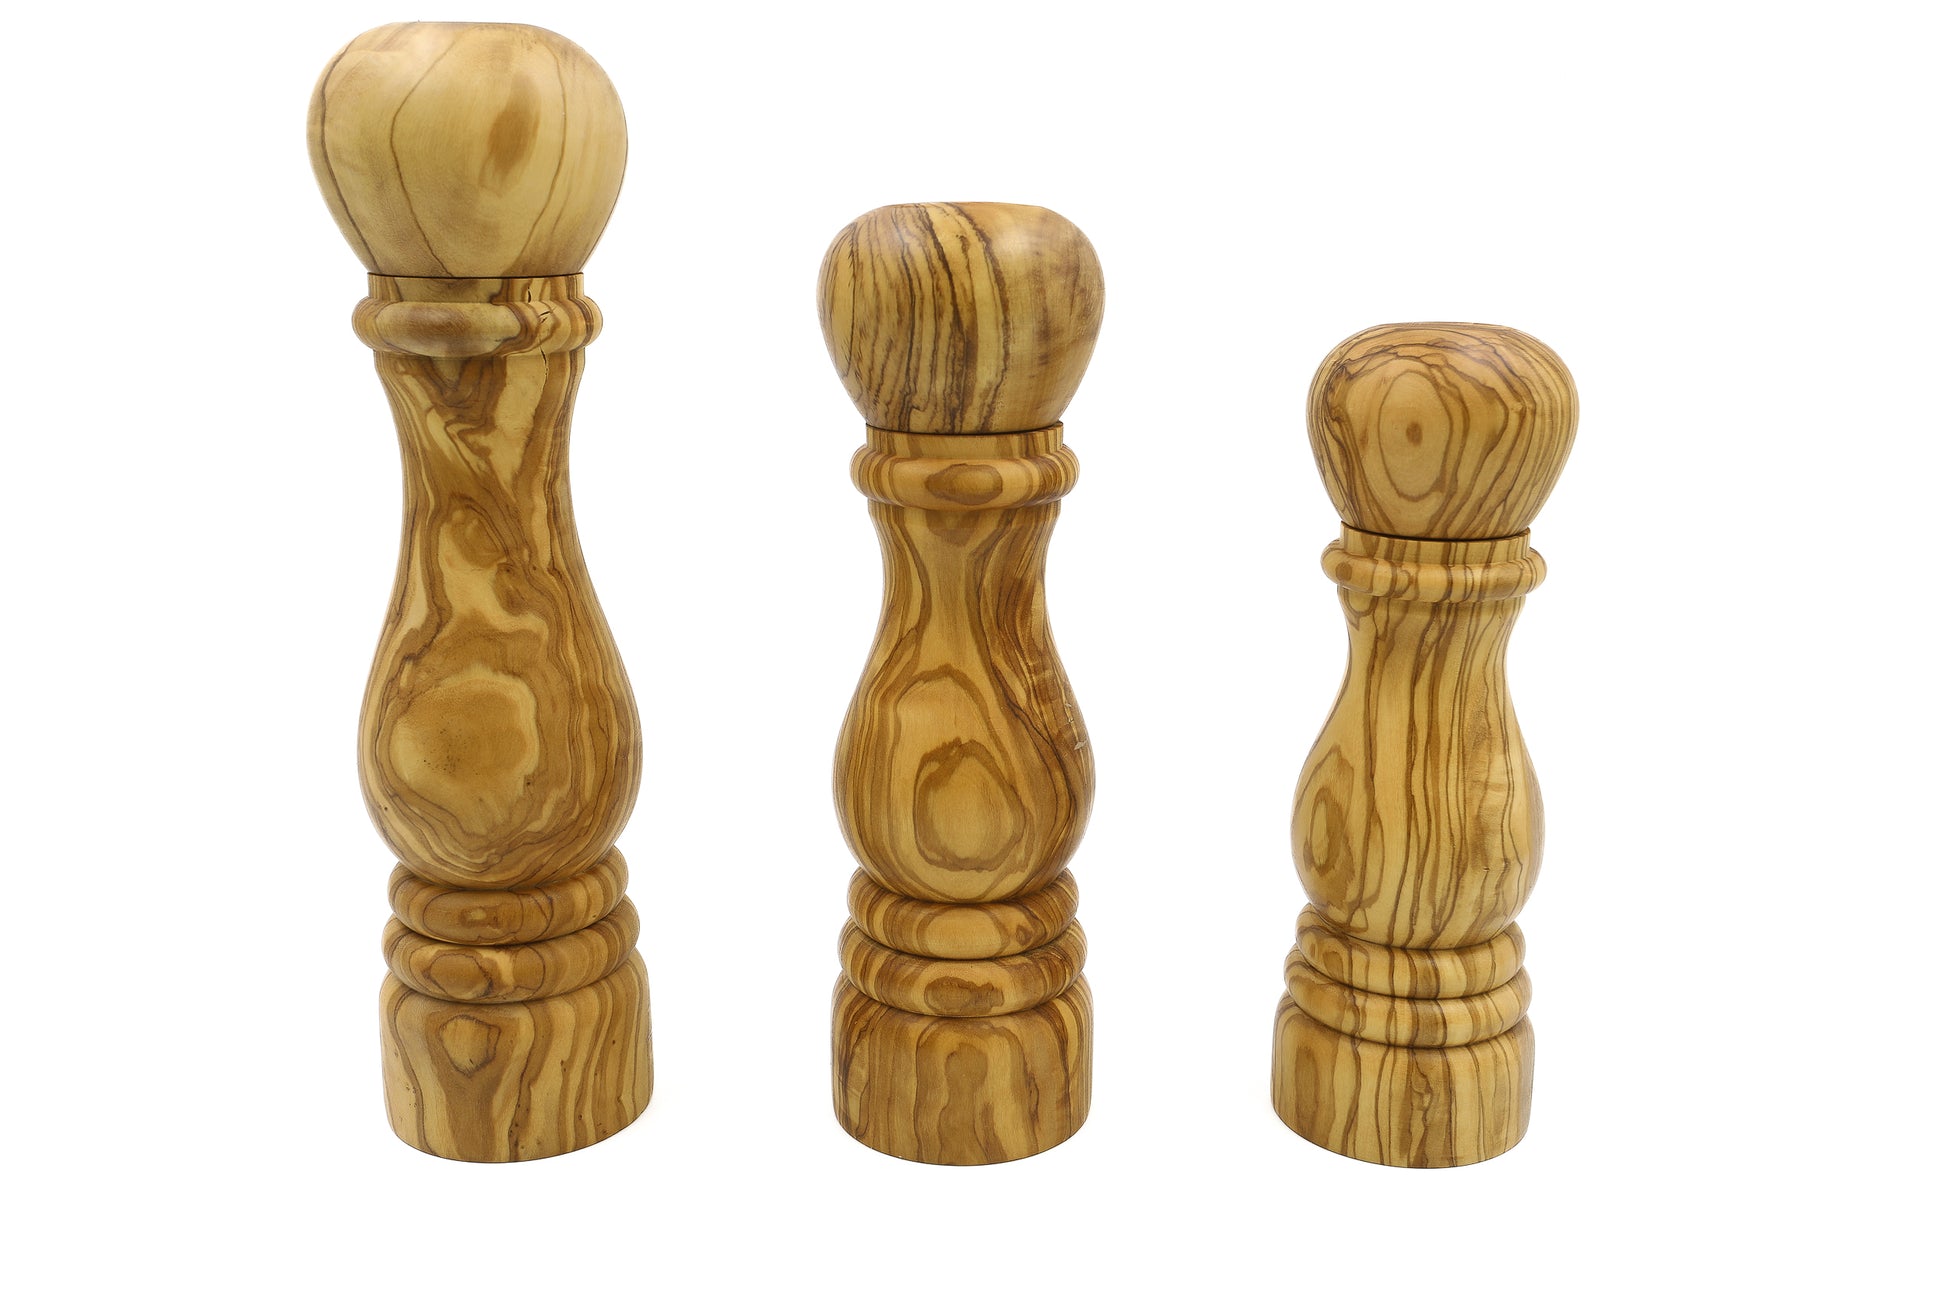 Rustic olive wood salt and pepper mills with a durable ceramic mechanism